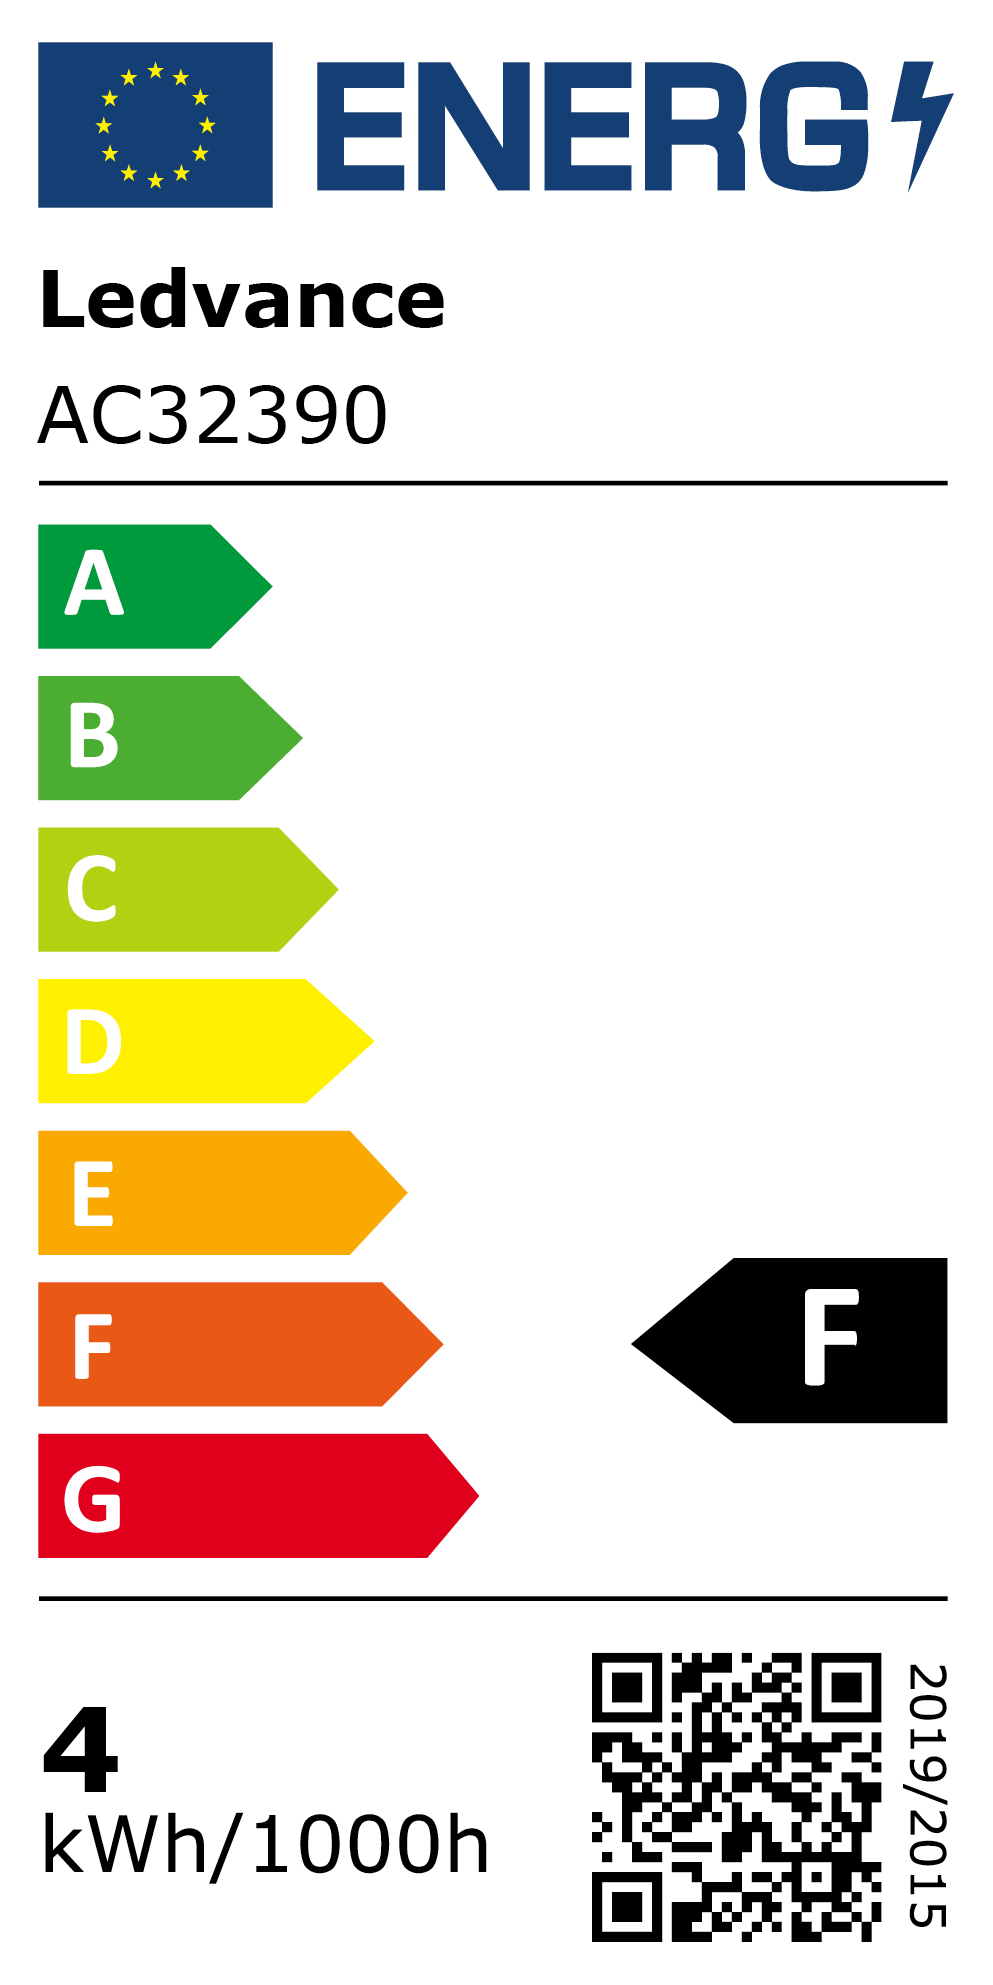 New 2021 Energy Rating Label: MPN AC32390